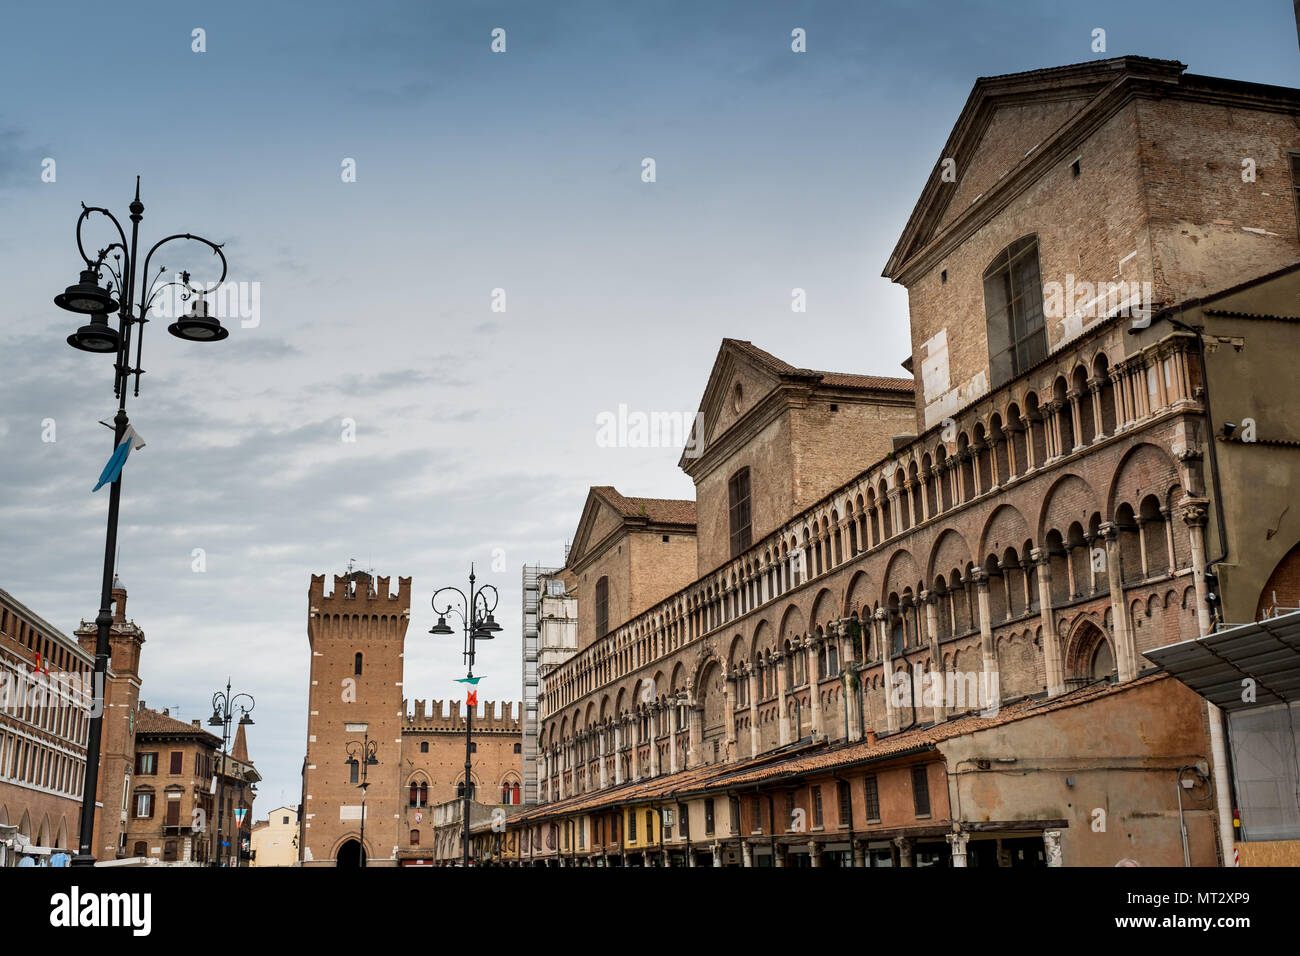 FERRARA, ITALY - Trieste and Trento square with Victoria tower and Cathedral of Saint George, Ferrara, Emilia-Romagna, Italy Stock Photo